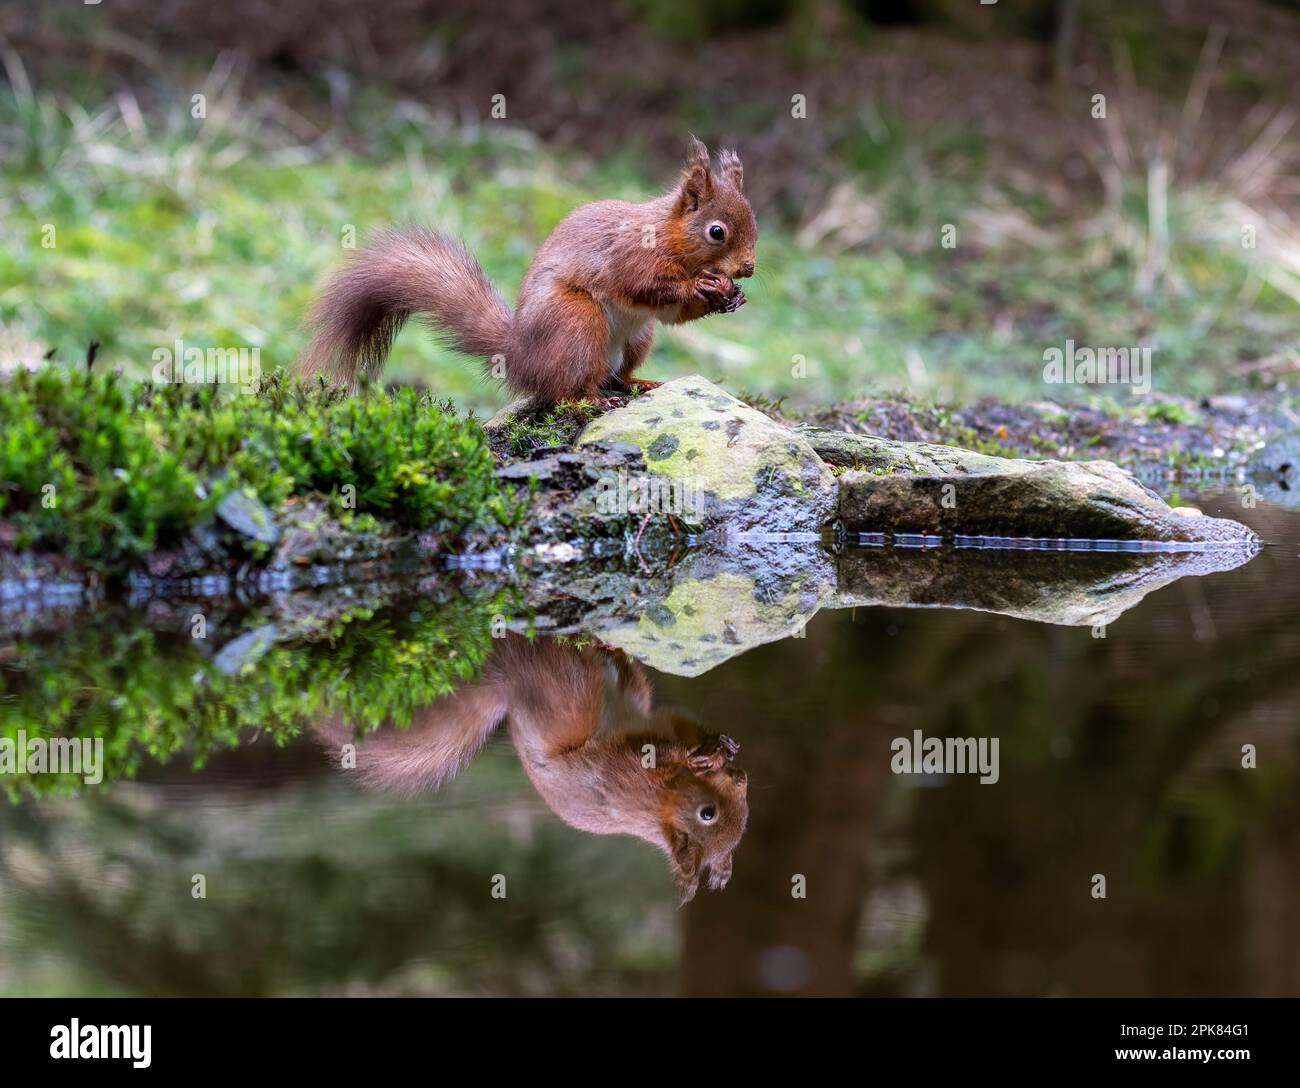 A British Red Squirrel, (Sciurus vulgaris), standing by a pool of water eating a Hazelnut, (with reflection) Stock Photo